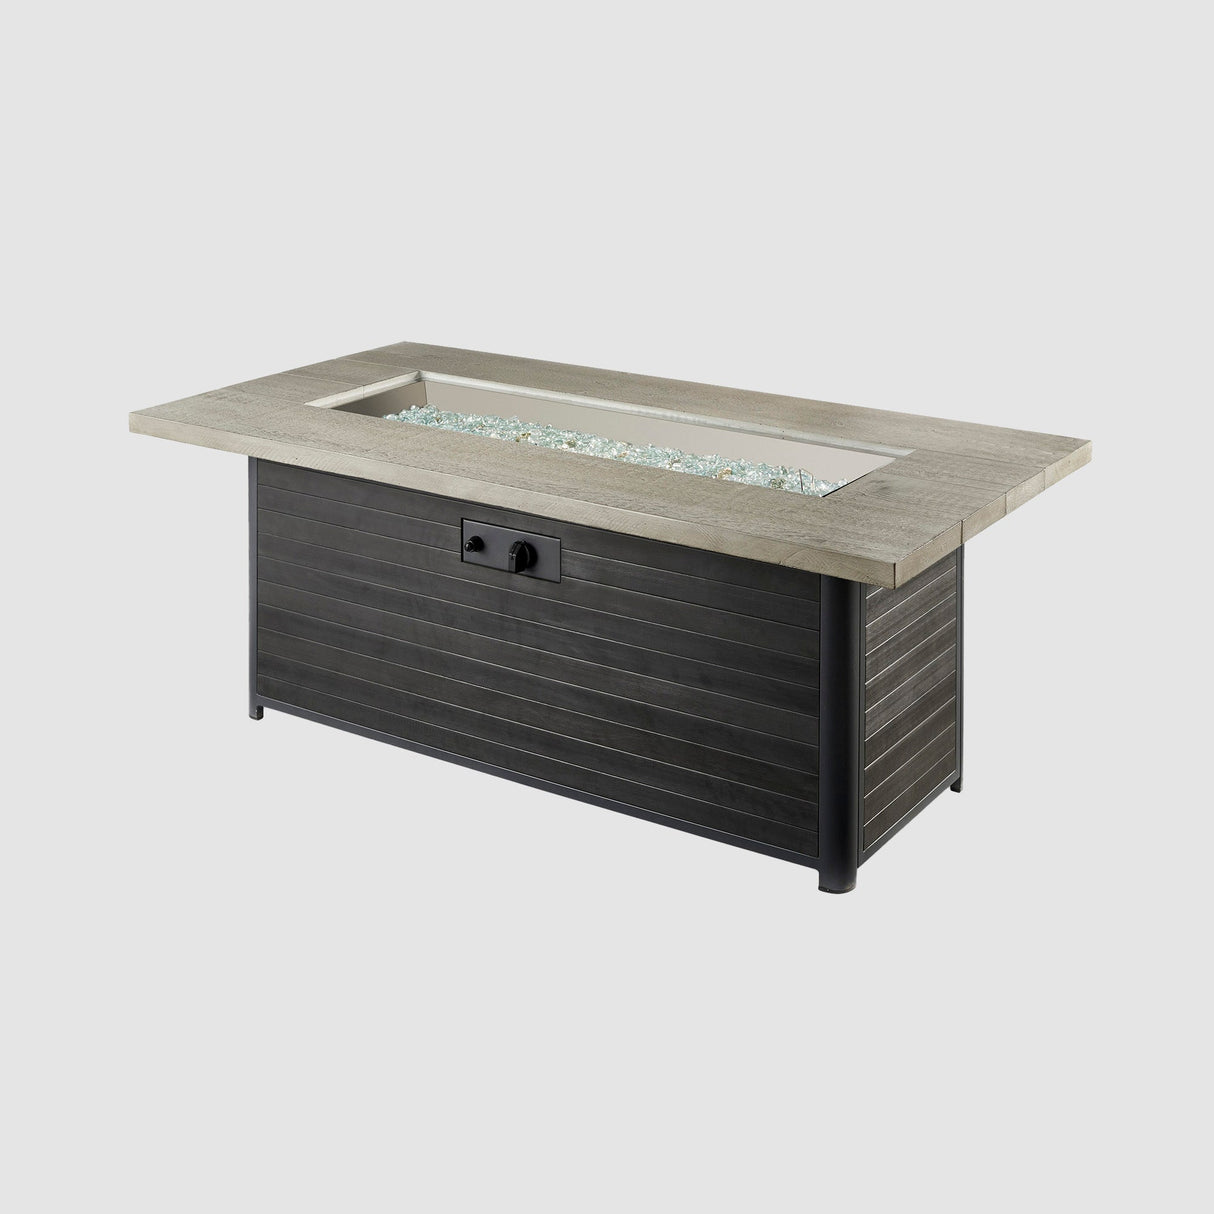 Cedar Ridge Linear Gas Fire Pit Table with fire media placed on the burner on a grey background